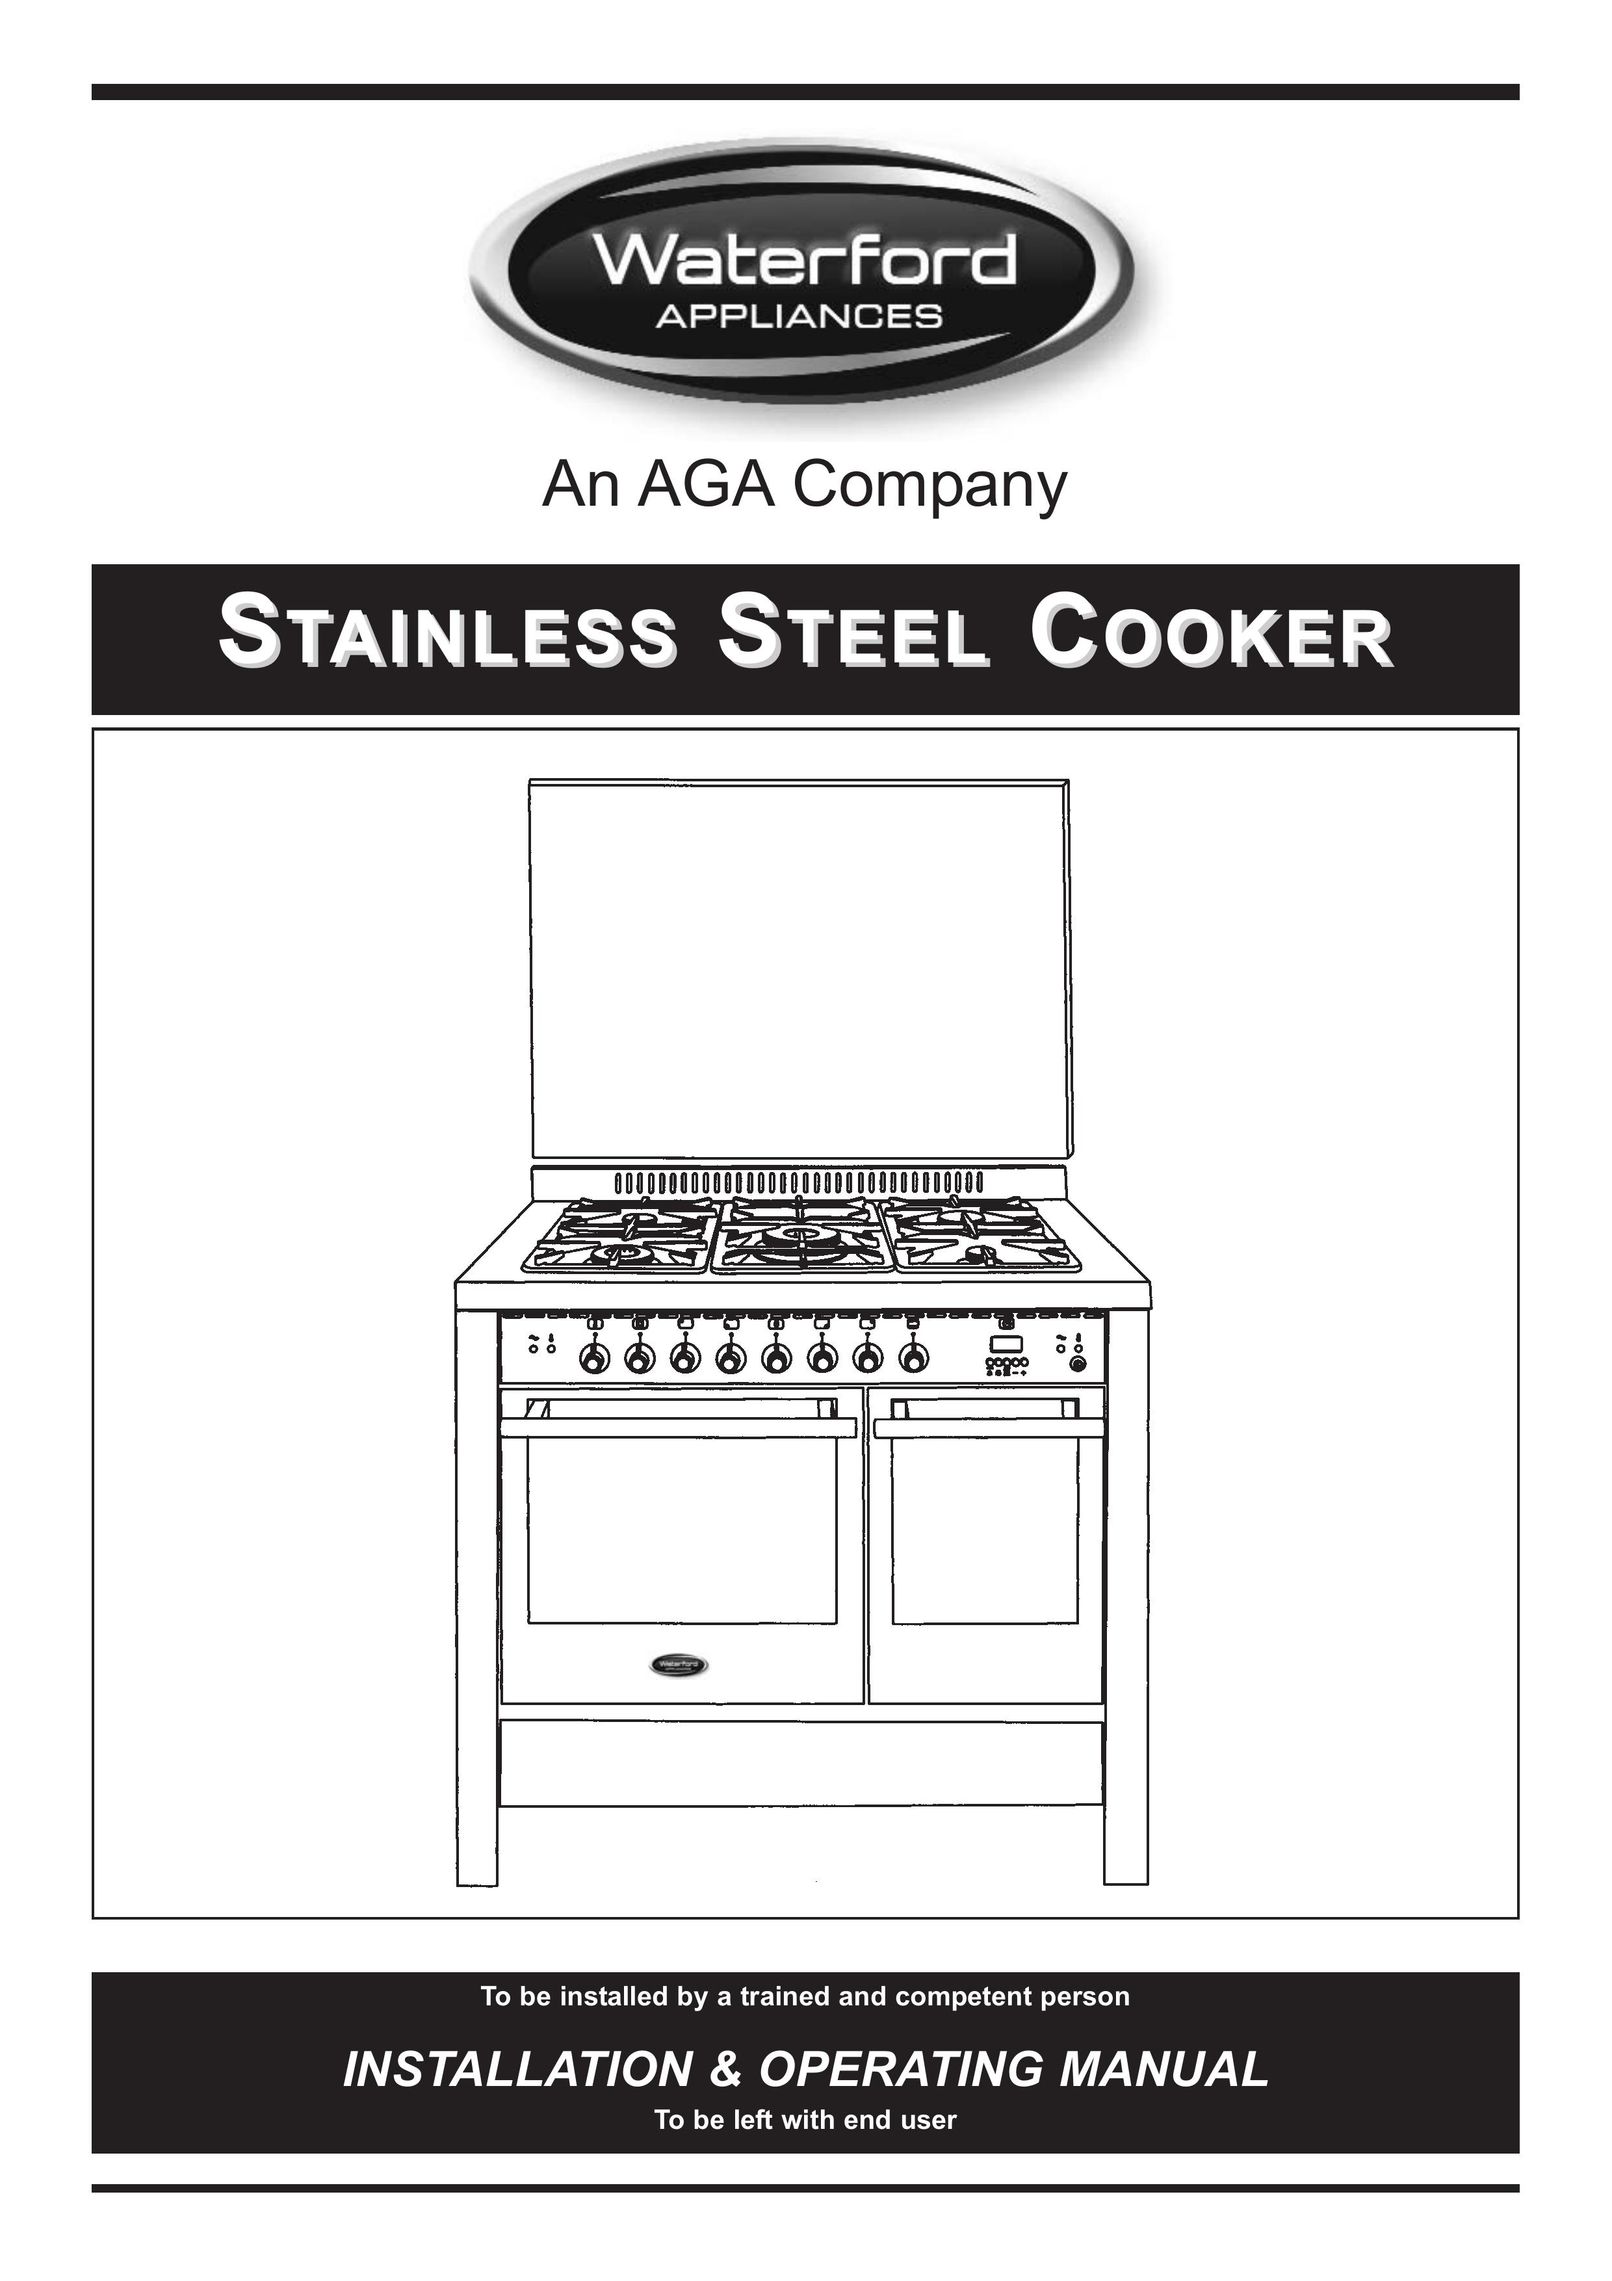 Waterford Appliances Stainless Stell Cooker Cooktop User Manual